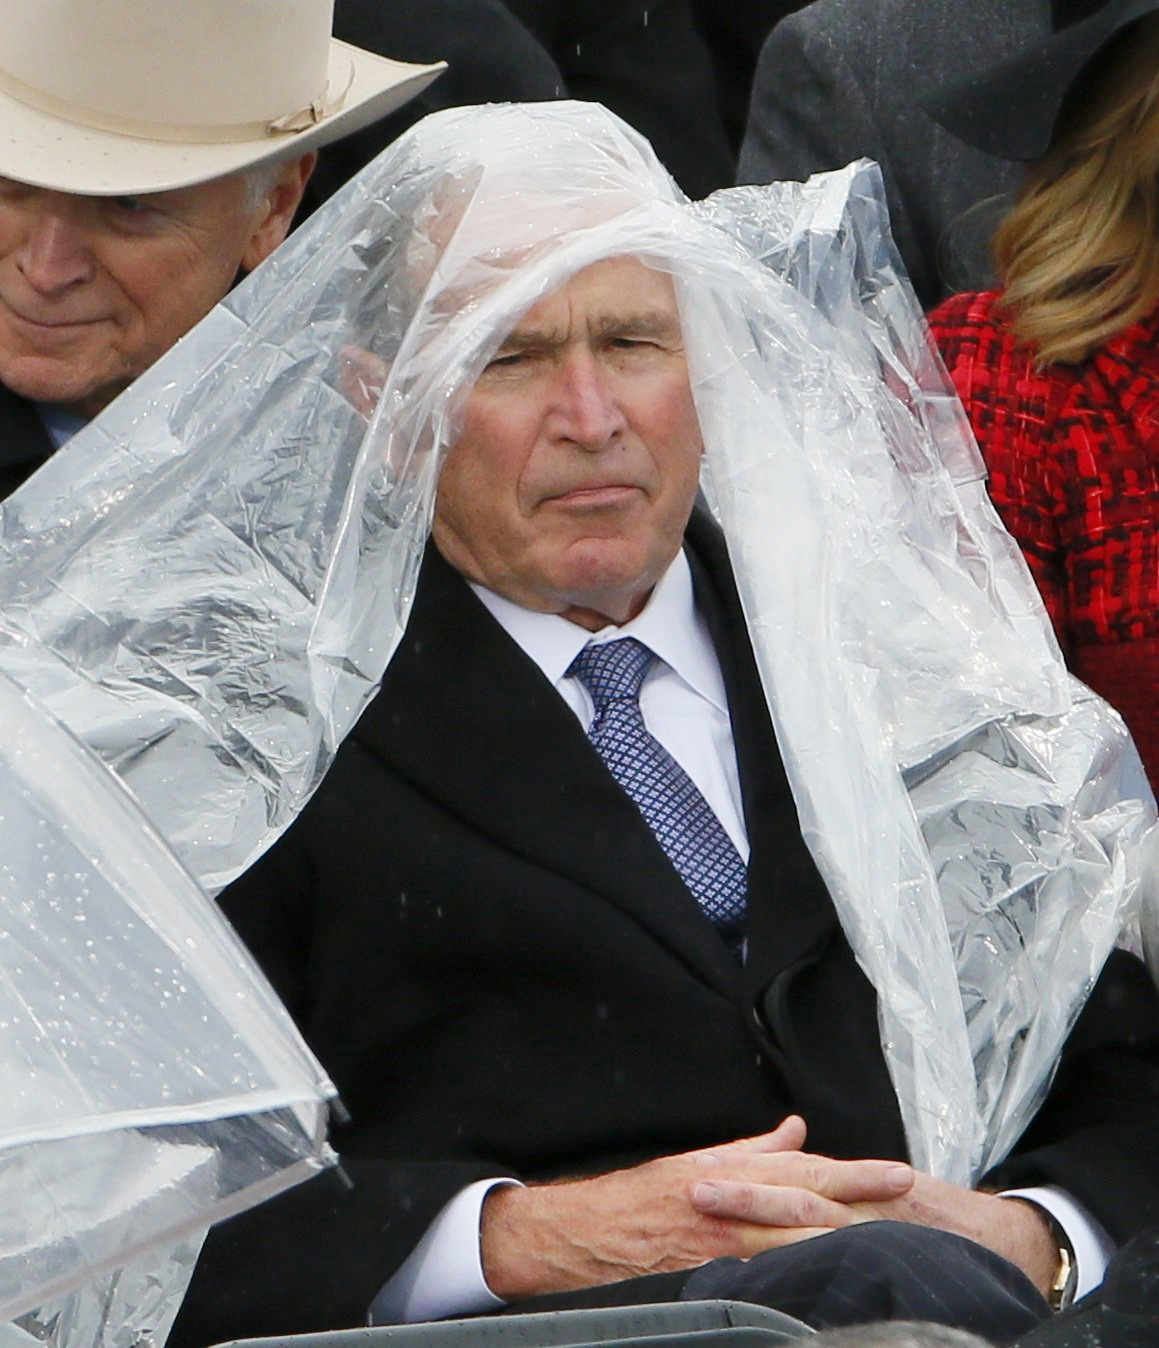 Photos of George W. Bush struggling with his rain poncho during President Trump's inauguration seemed to garner more media coverage than many of the former president's darker days. (Photo: Rueters/Rick Wilking)